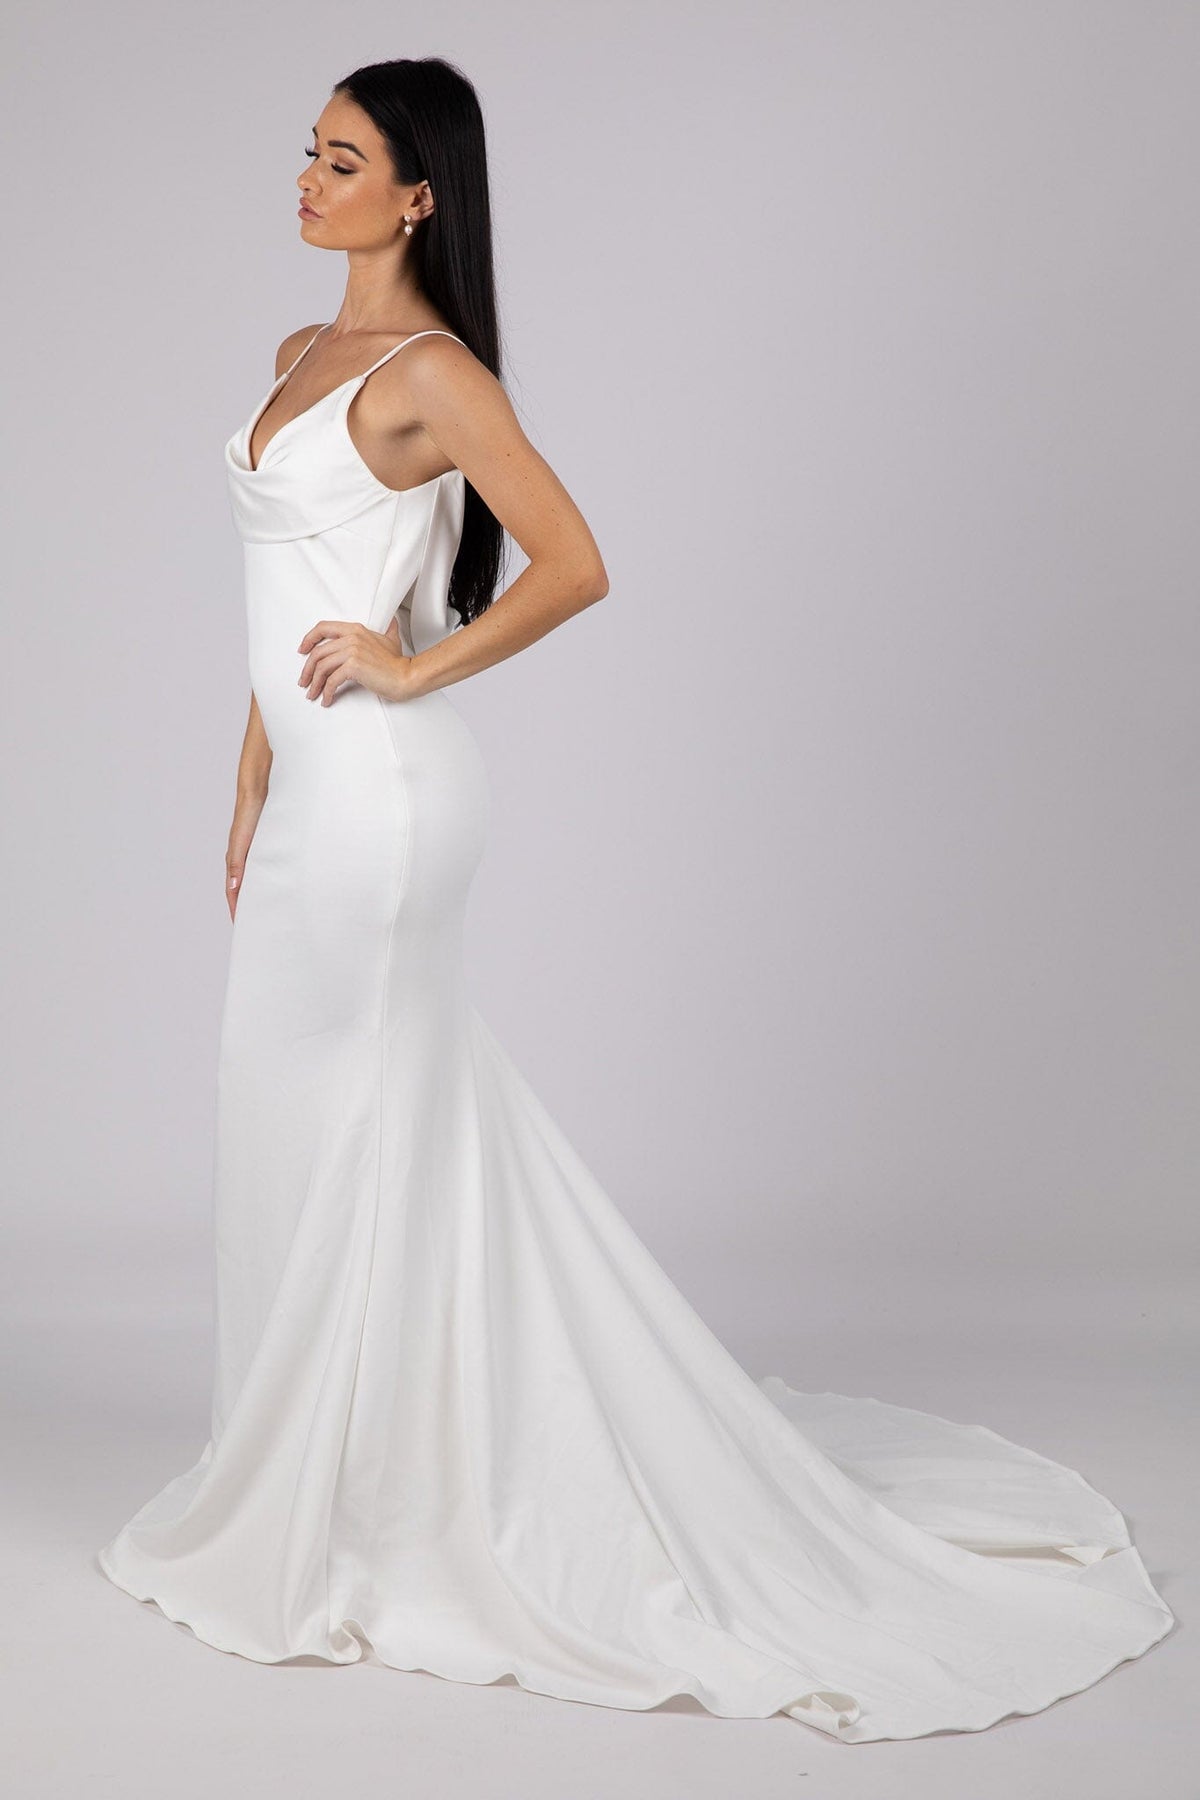 Side Image of Ivory White Fit and Flare Wedding Gown with Cowl Neckline, Thin Shoulder Straps and Backless with Cowl Back Detail